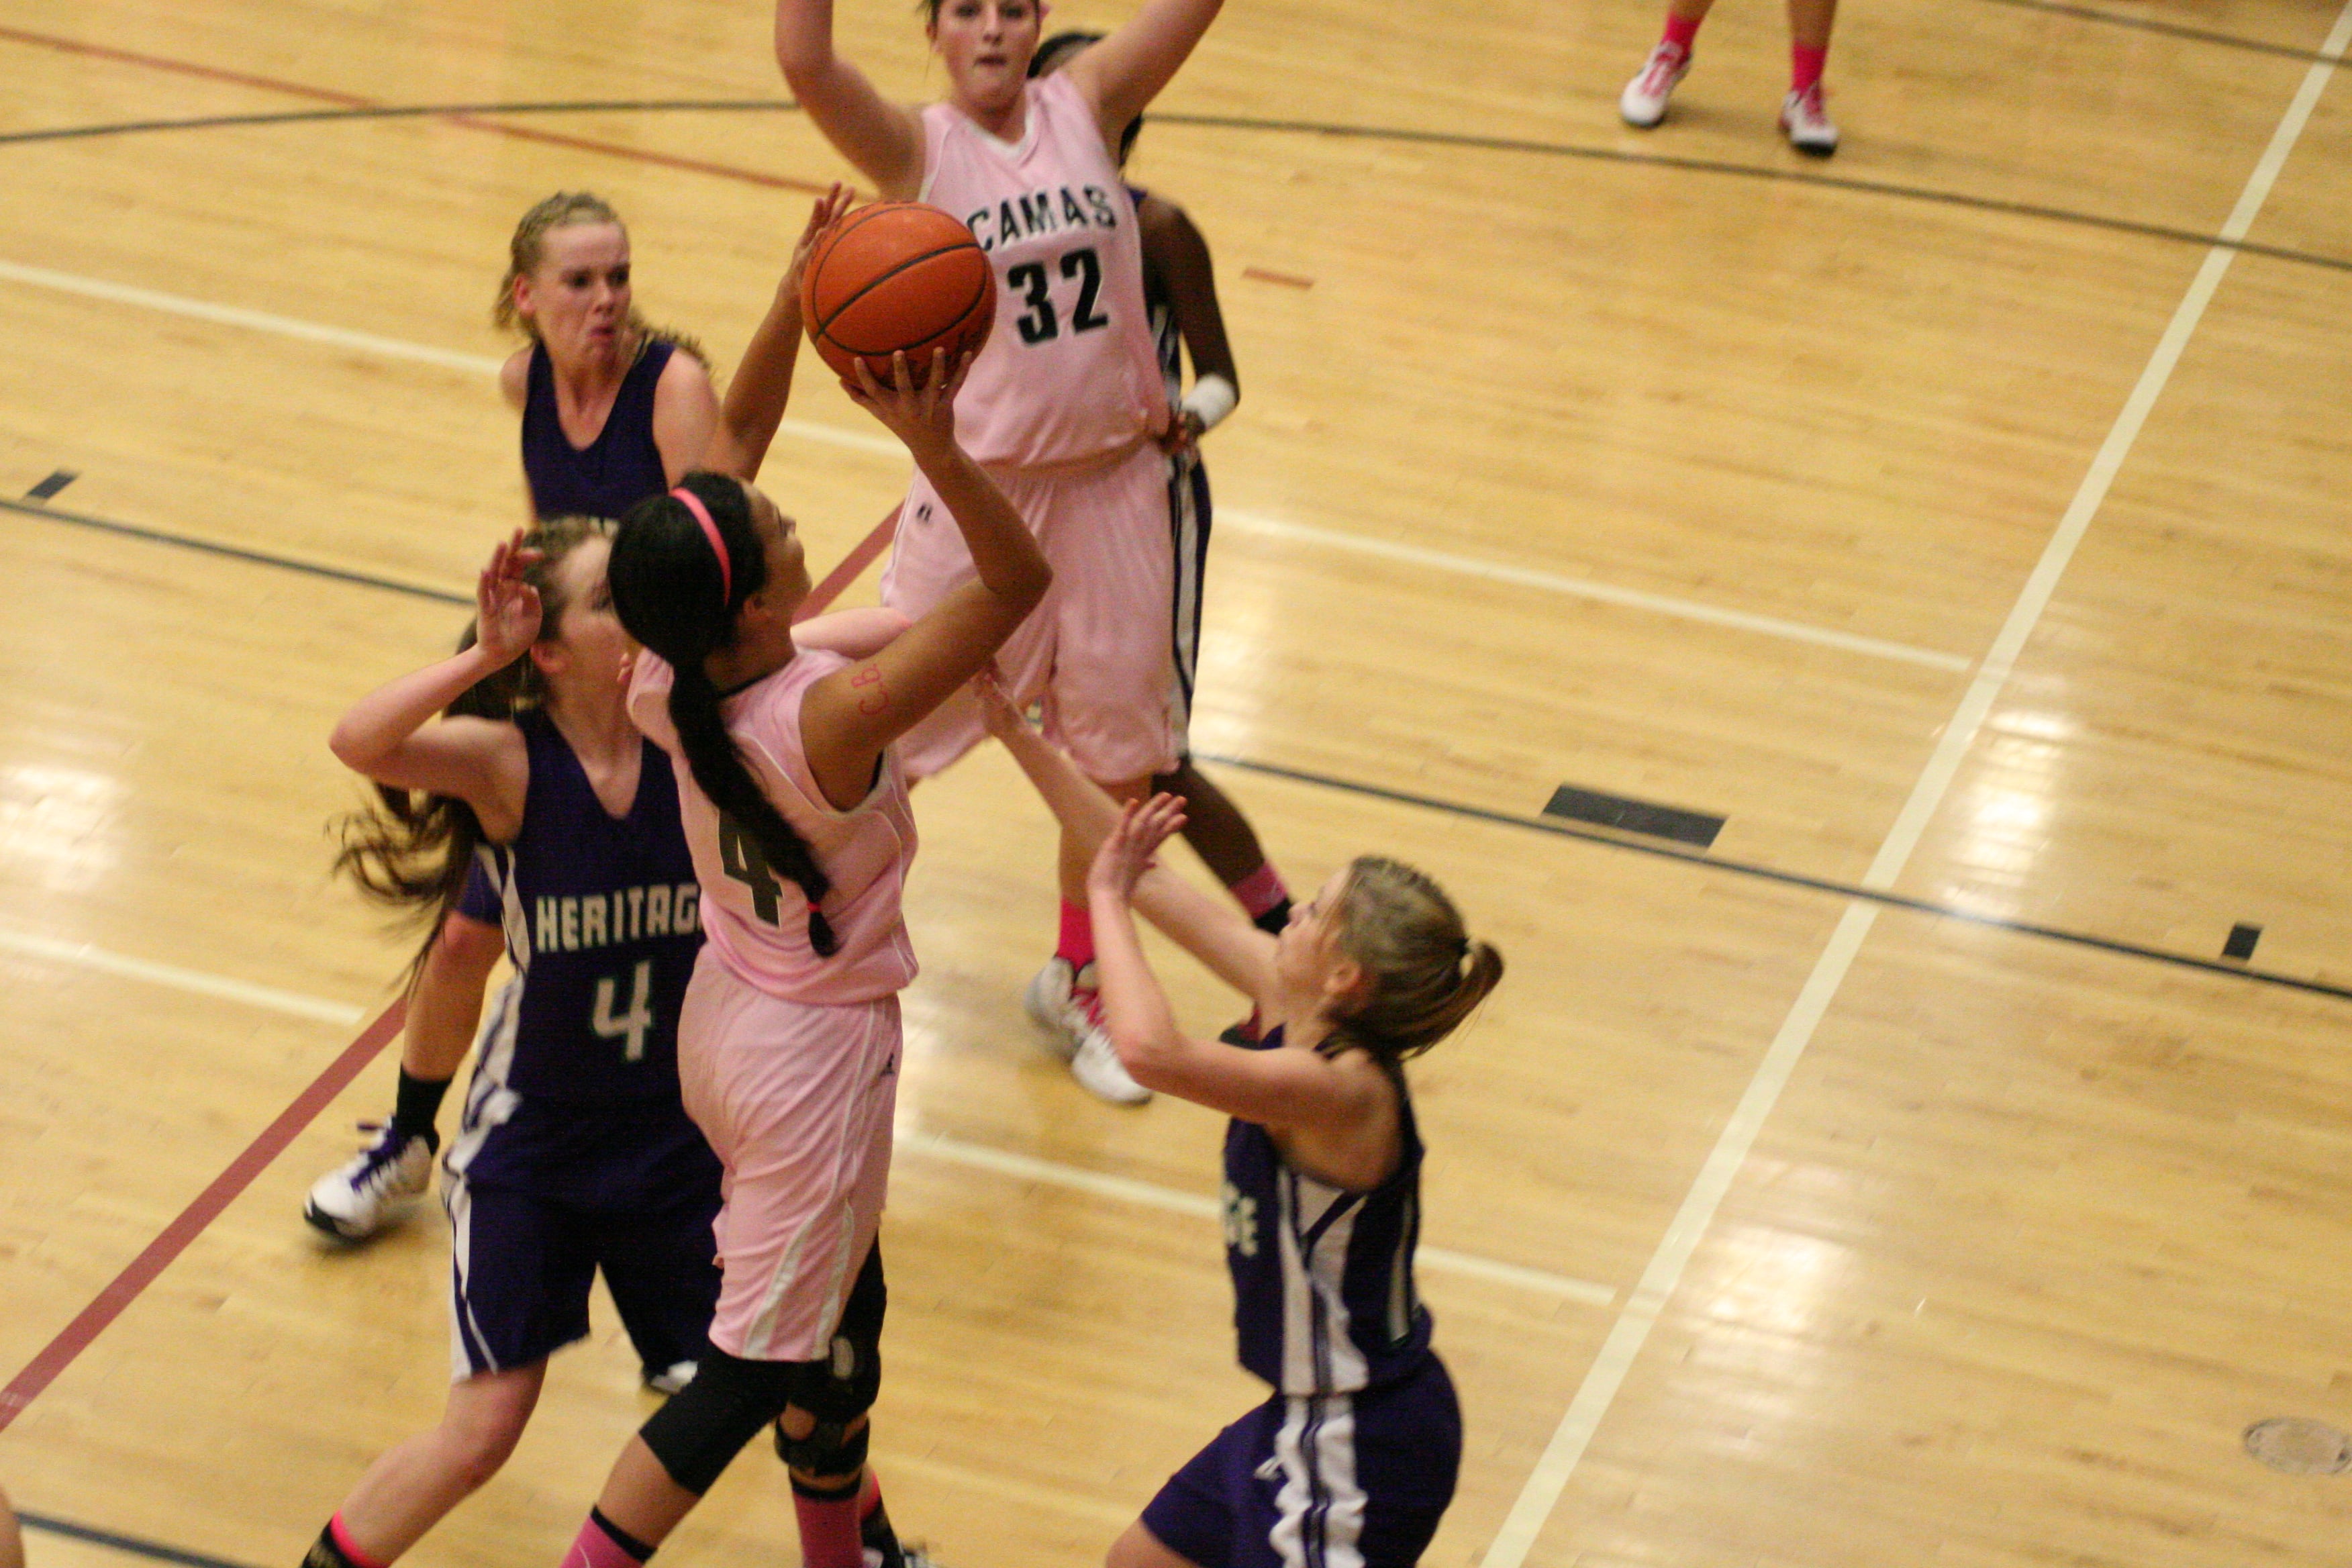 Brenna Khaw attacks the basket for the Papermakers.